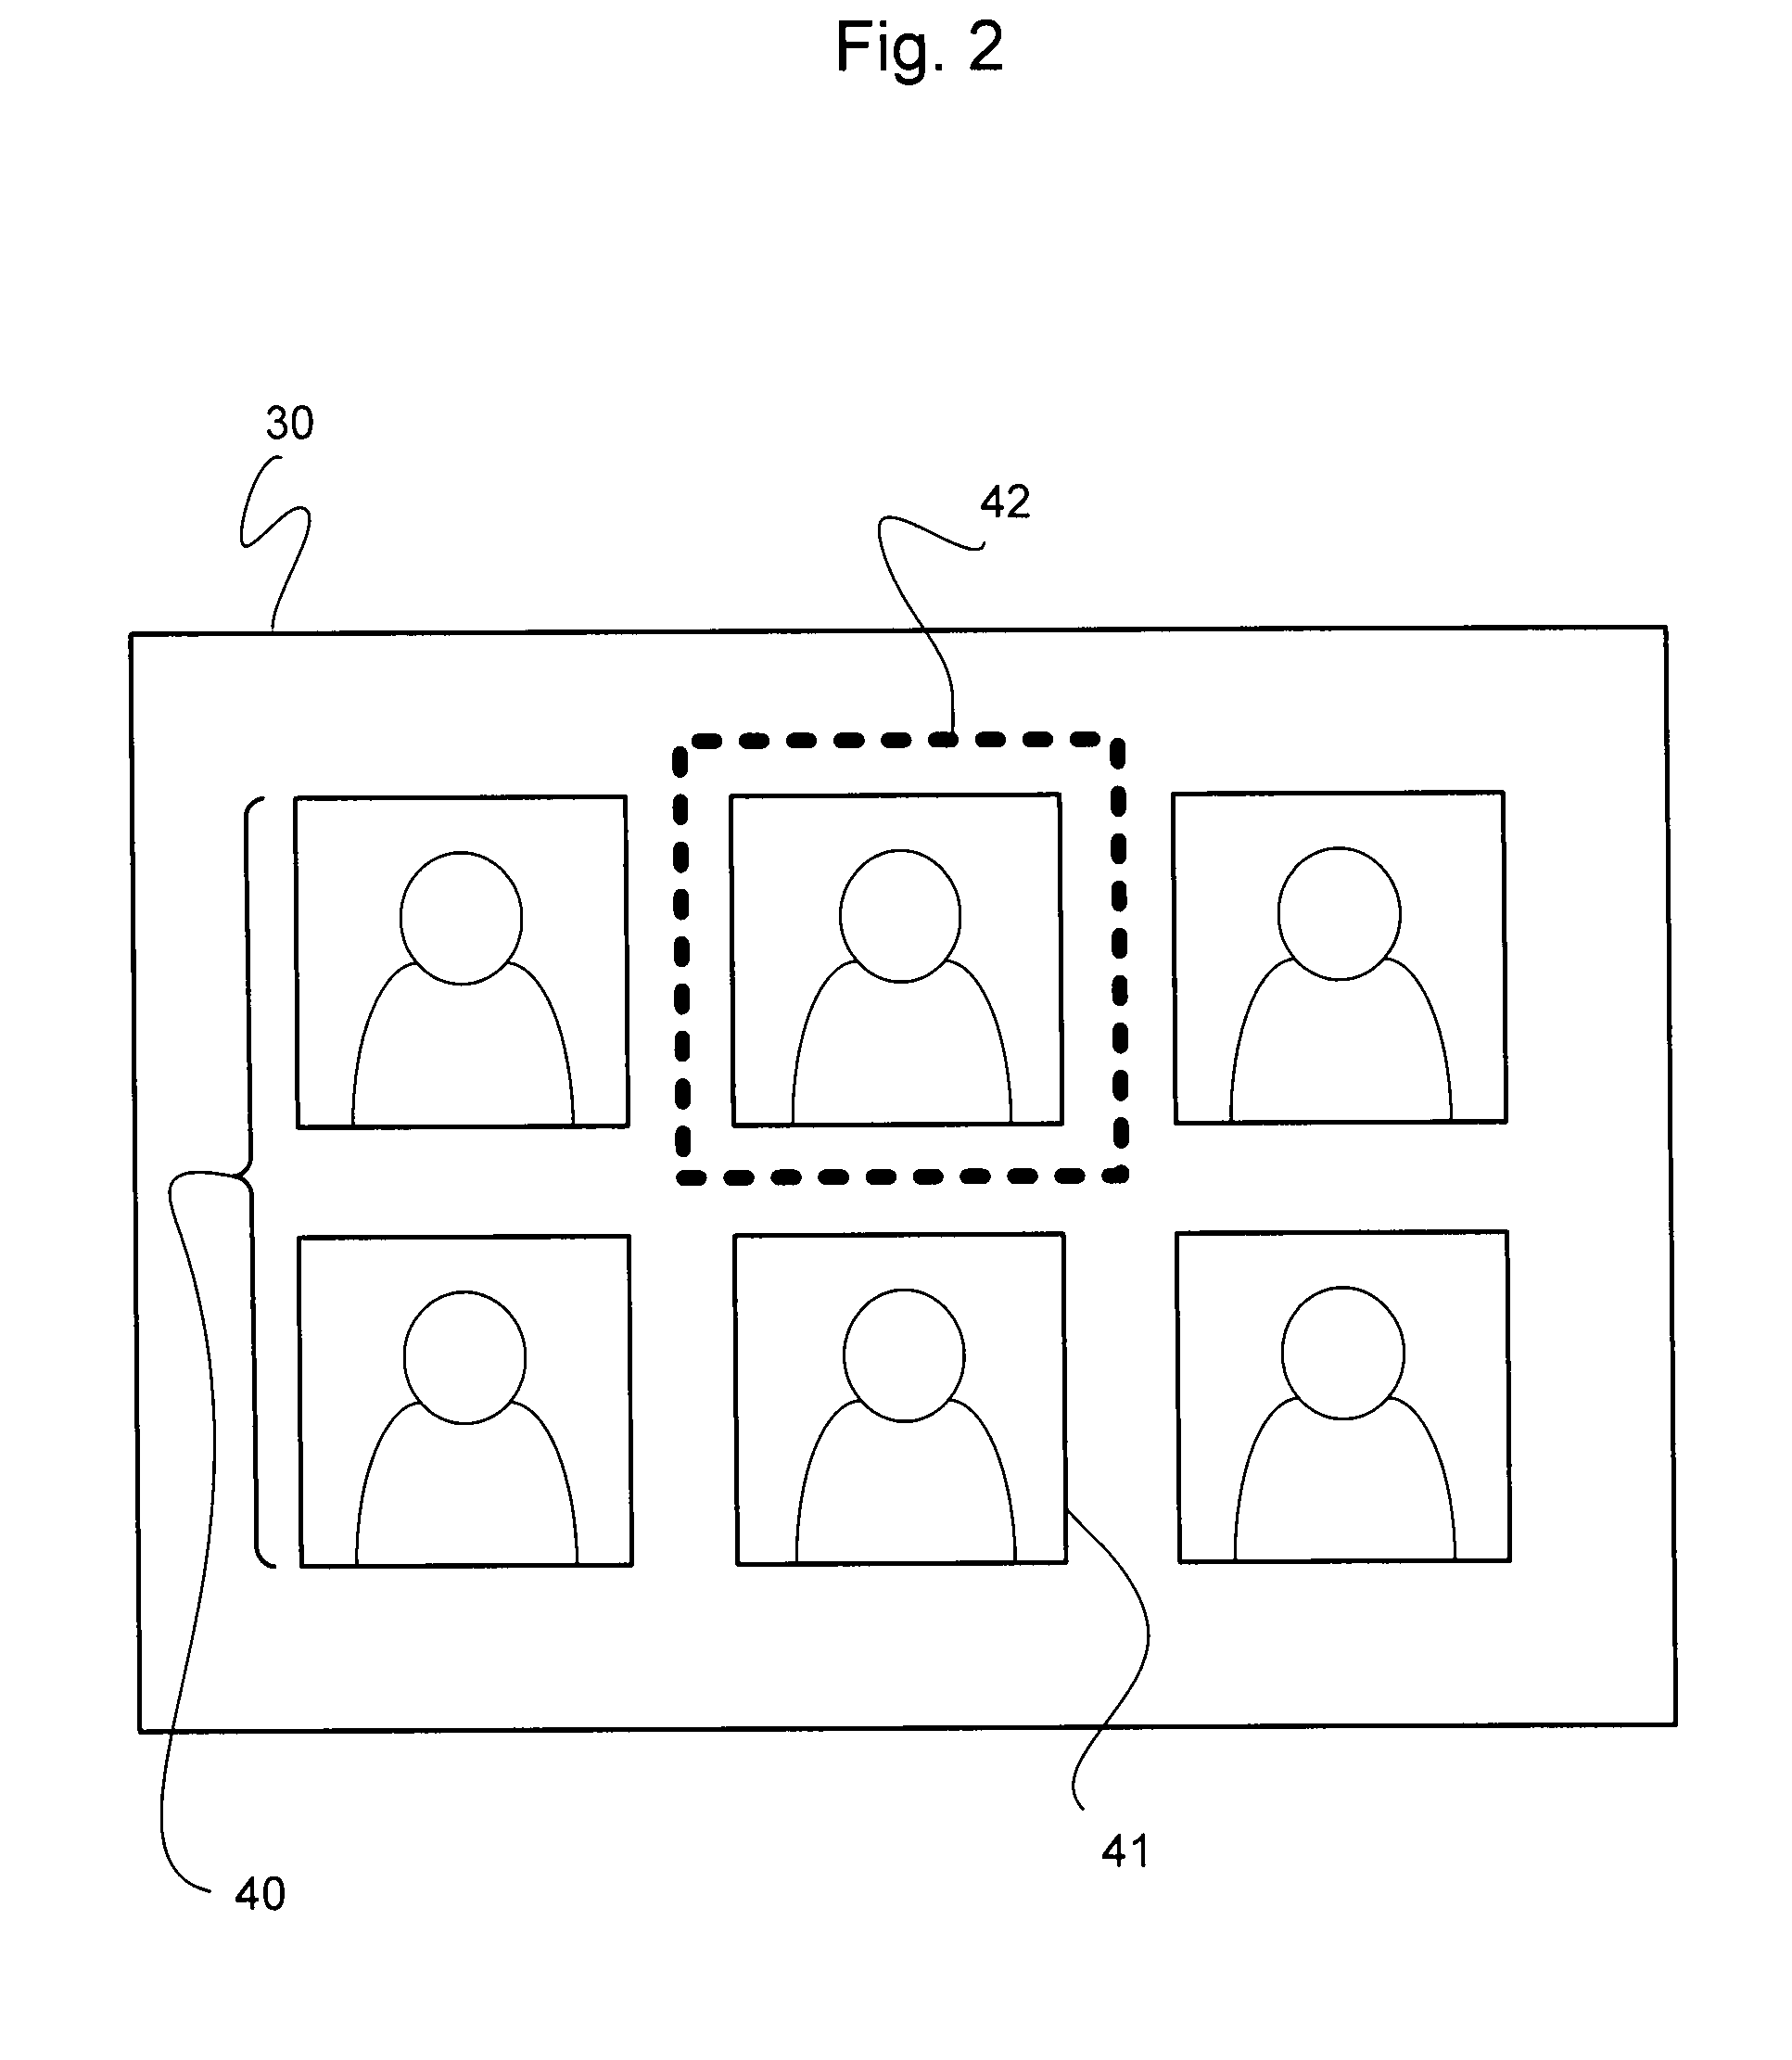 Apparatus and method for producing an EPG